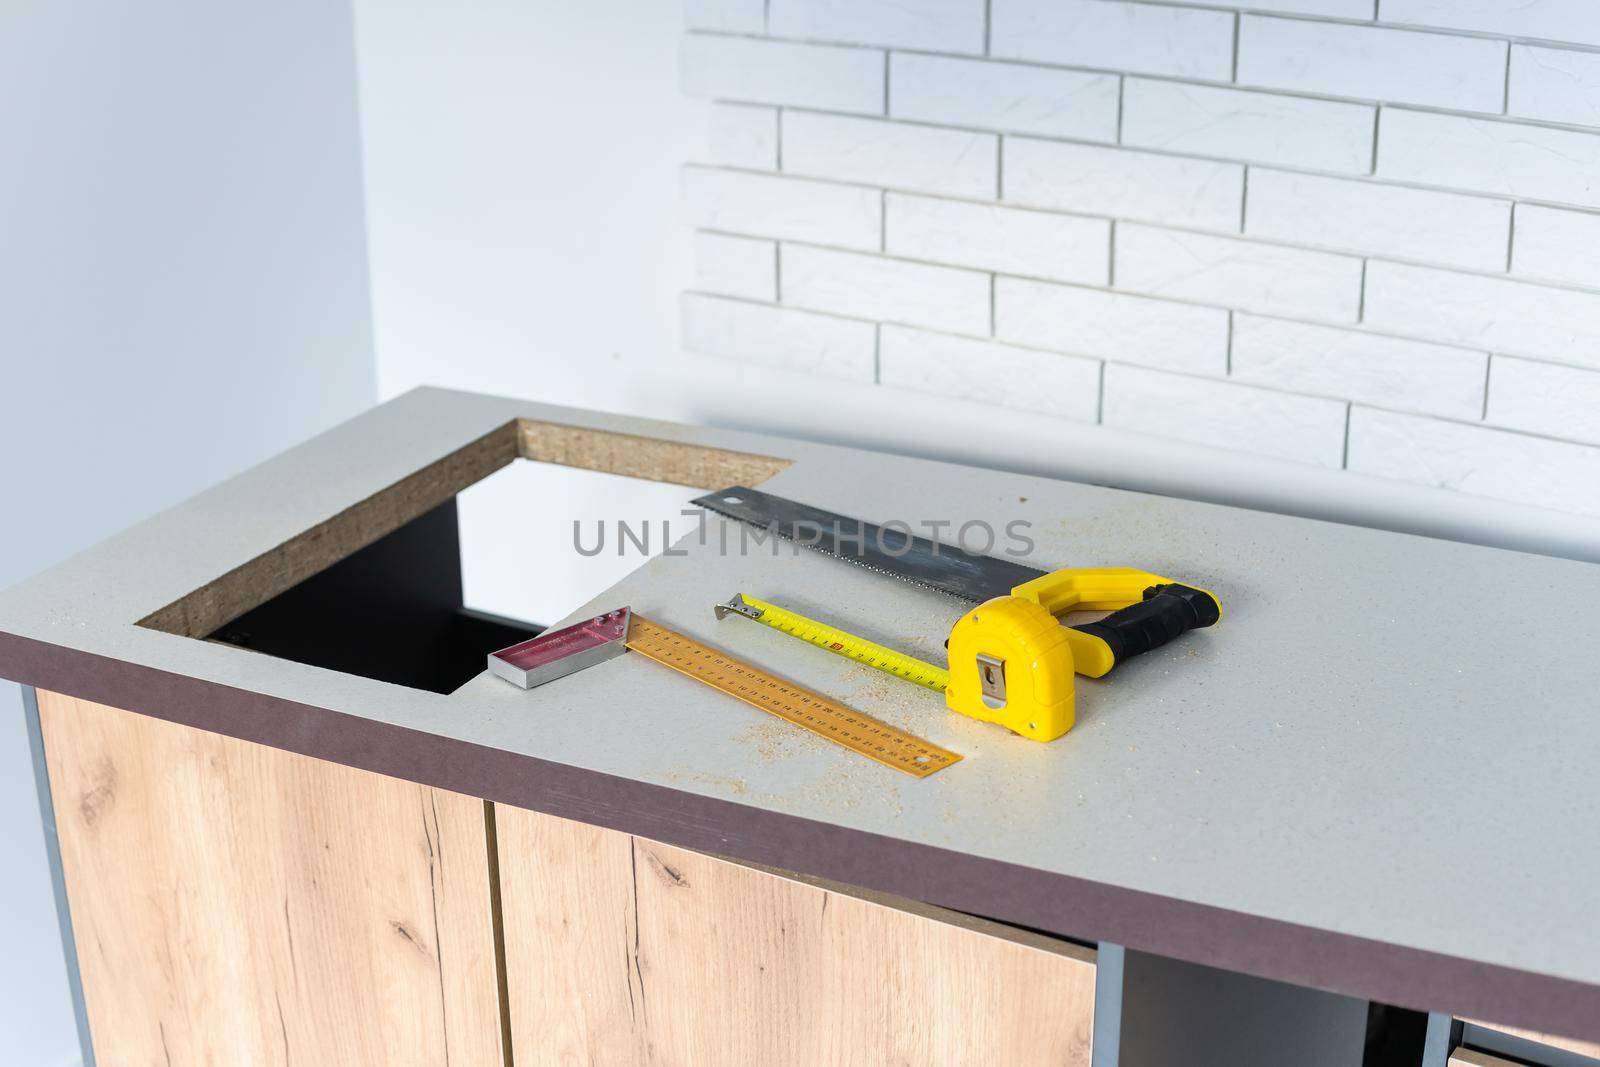 In the kitchen, the square is square-cut for installation of the countertop